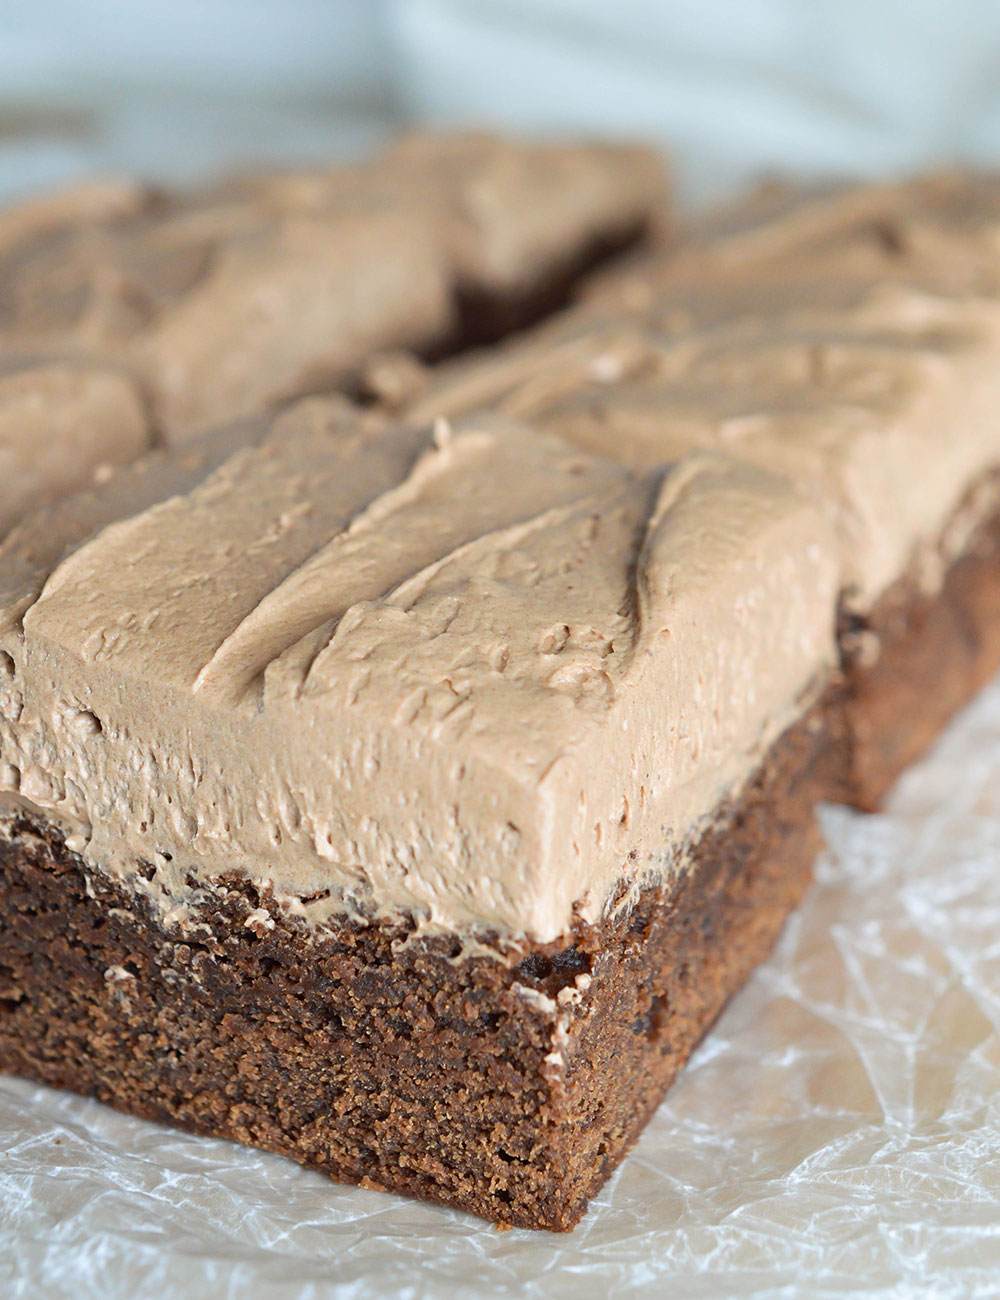 Where can you find a basic brownie recipe?